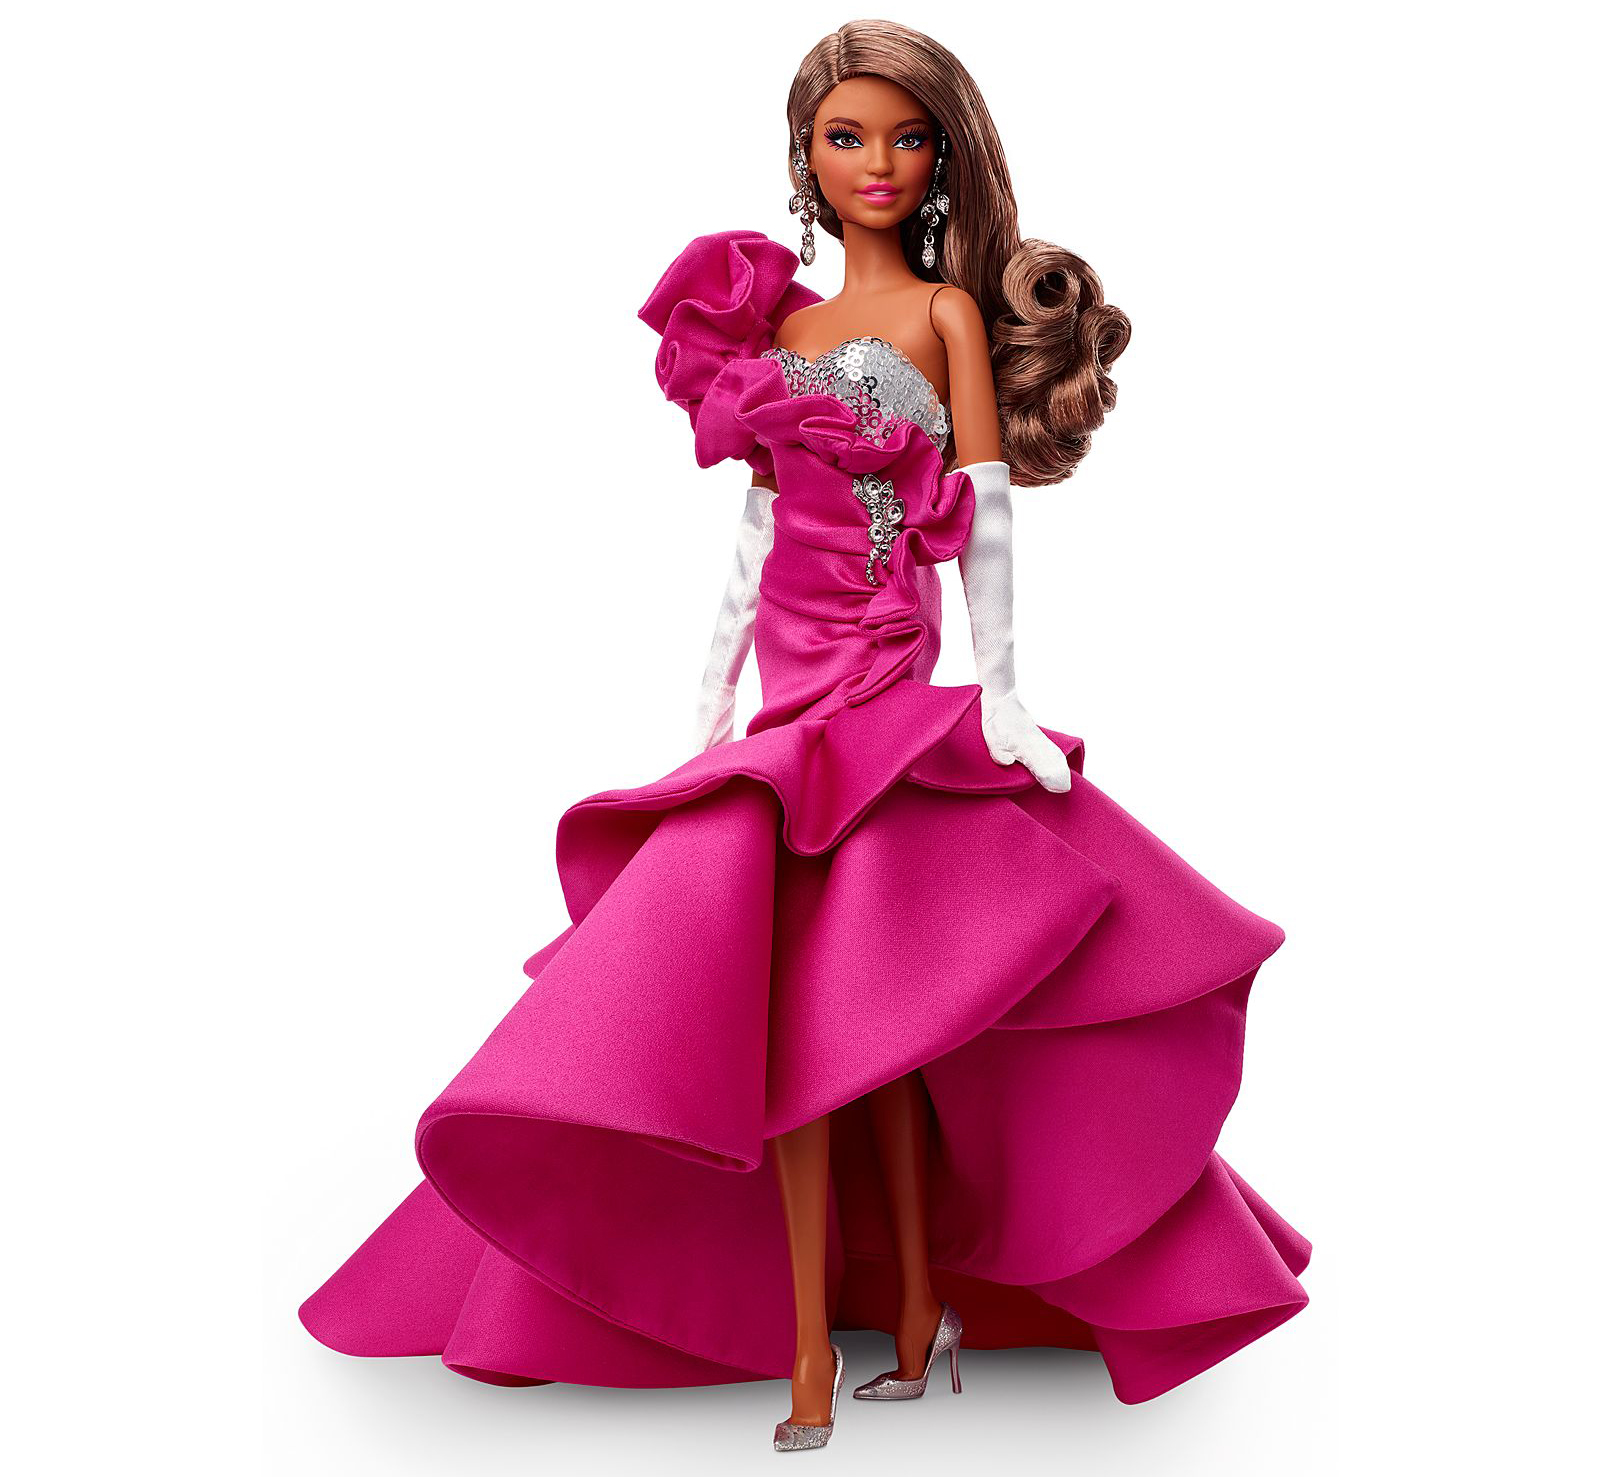 New Barbie Made to Move dolls 2021 - YouLoveIt.com